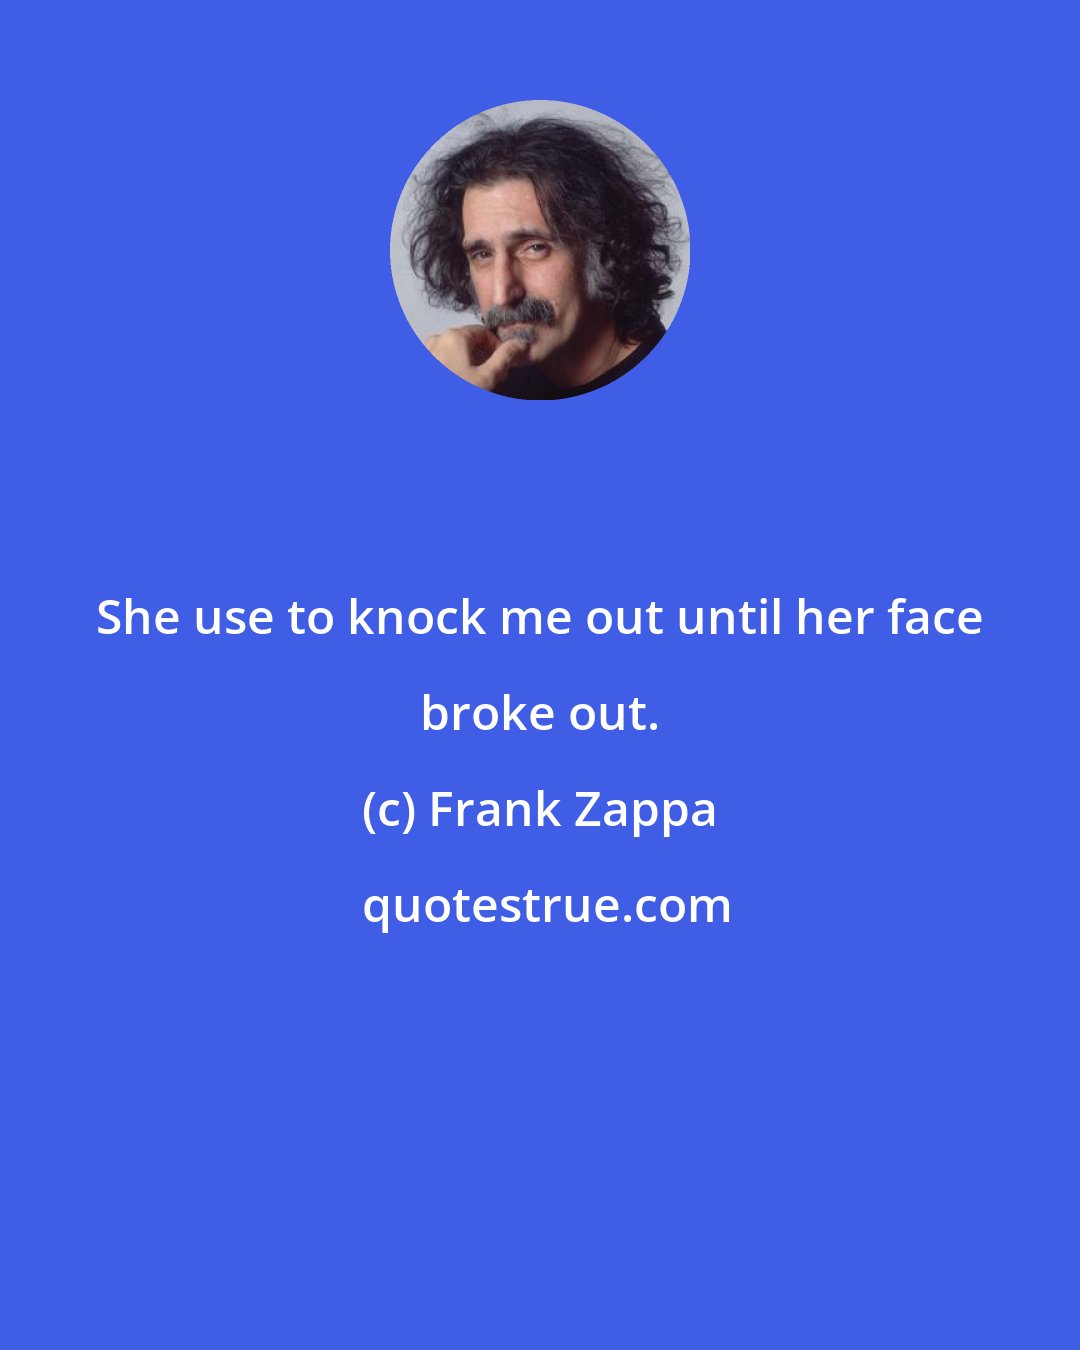 Frank Zappa: She use to knock me out until her face broke out.